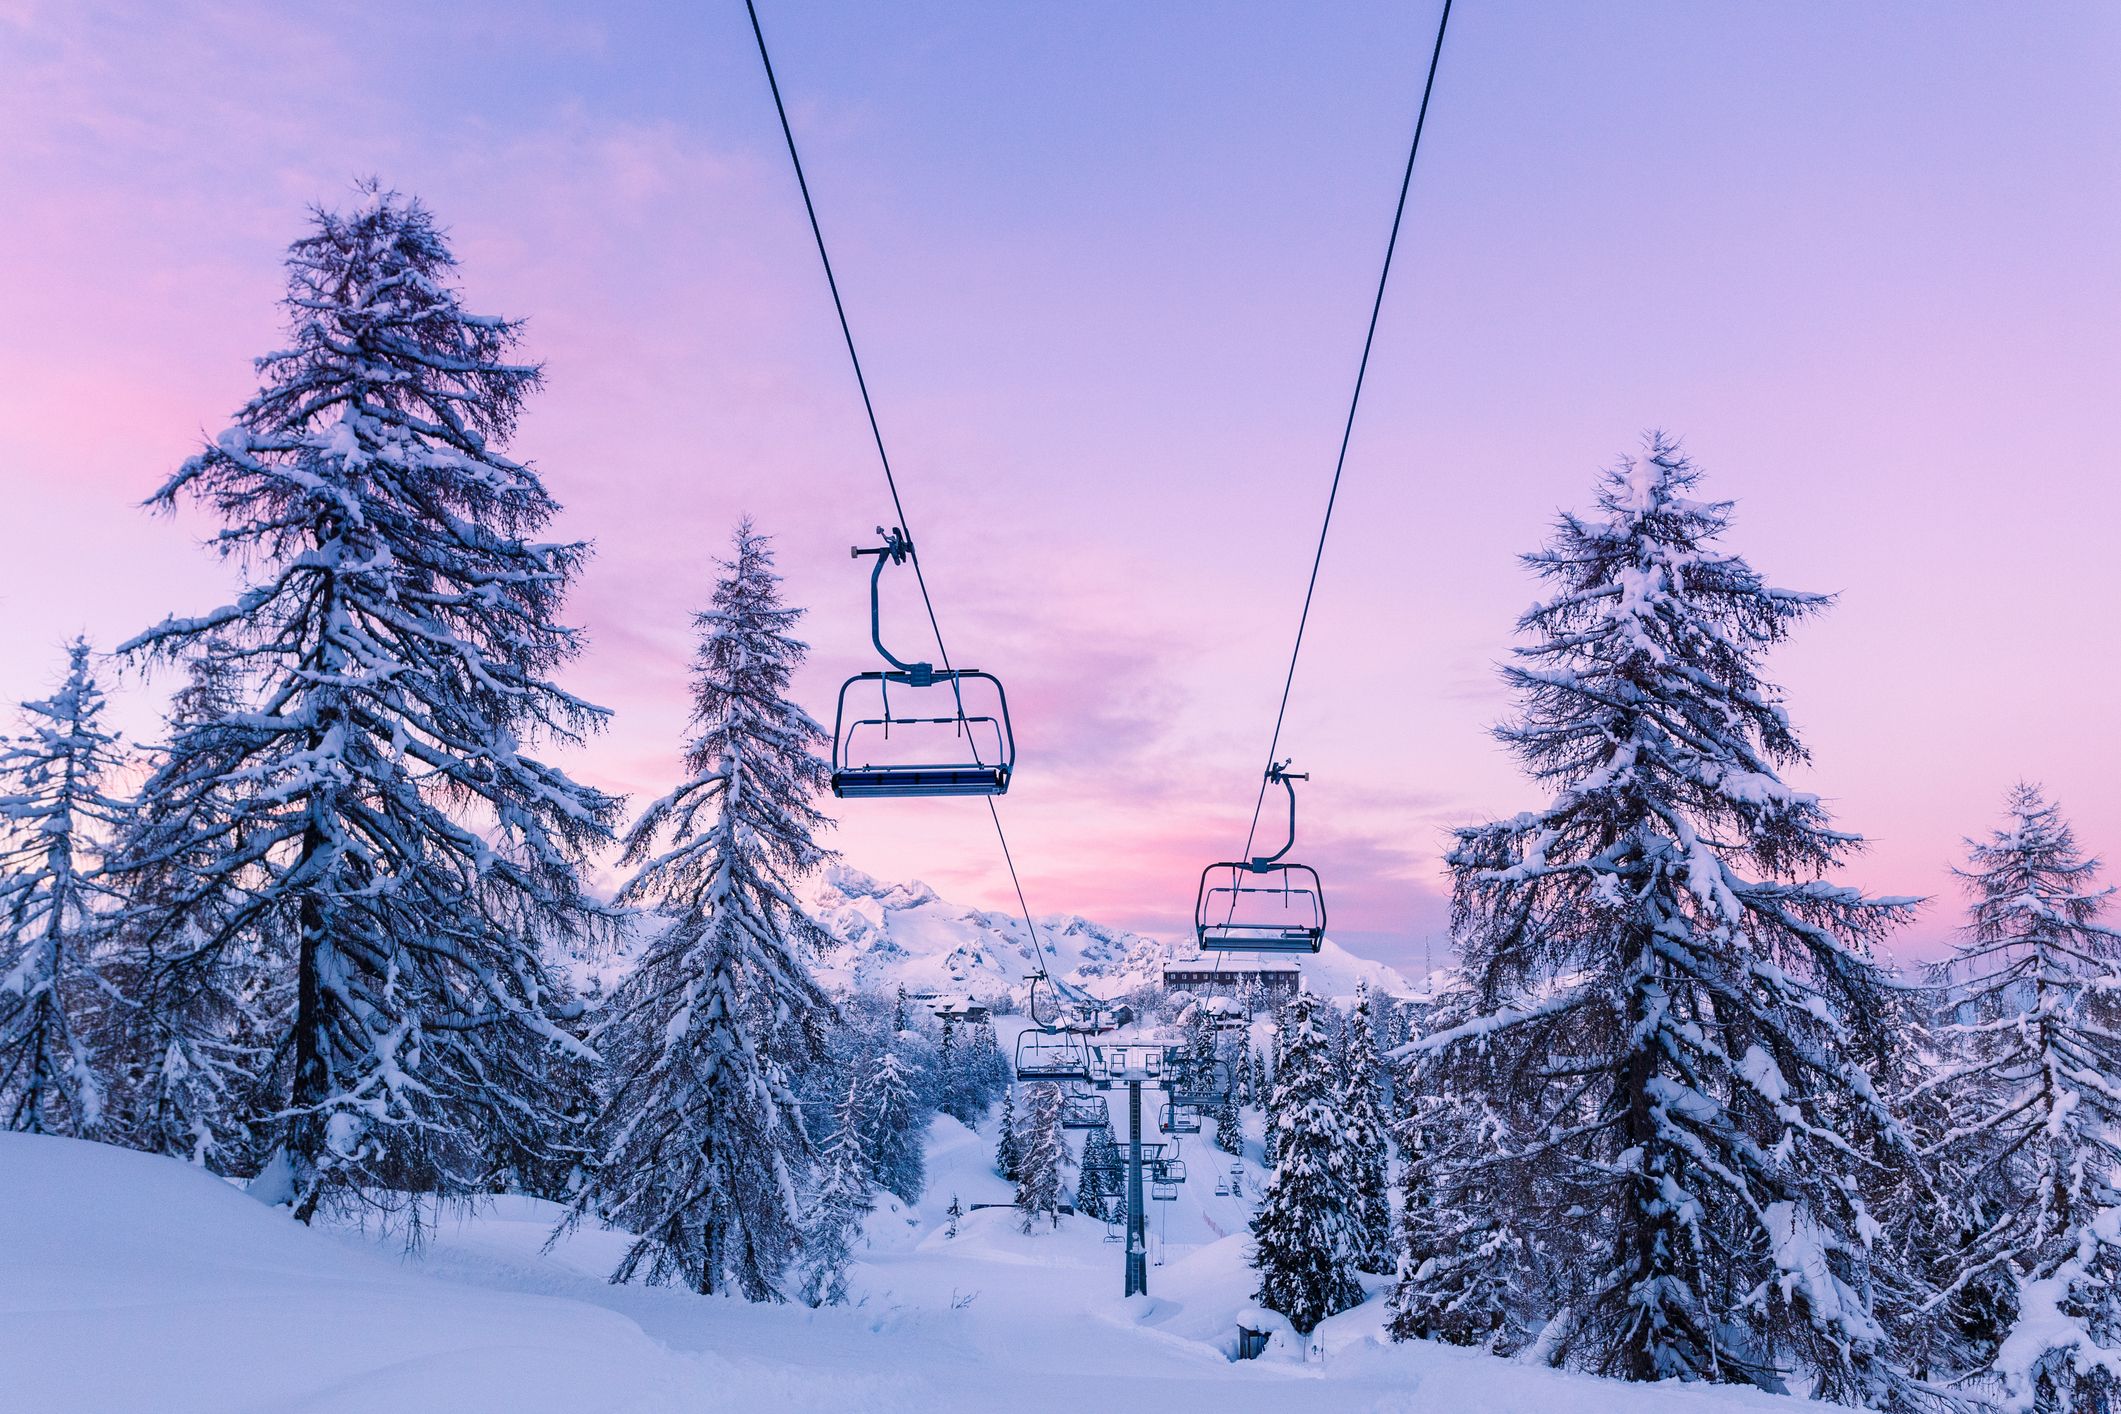 Ski lift with snow in trees